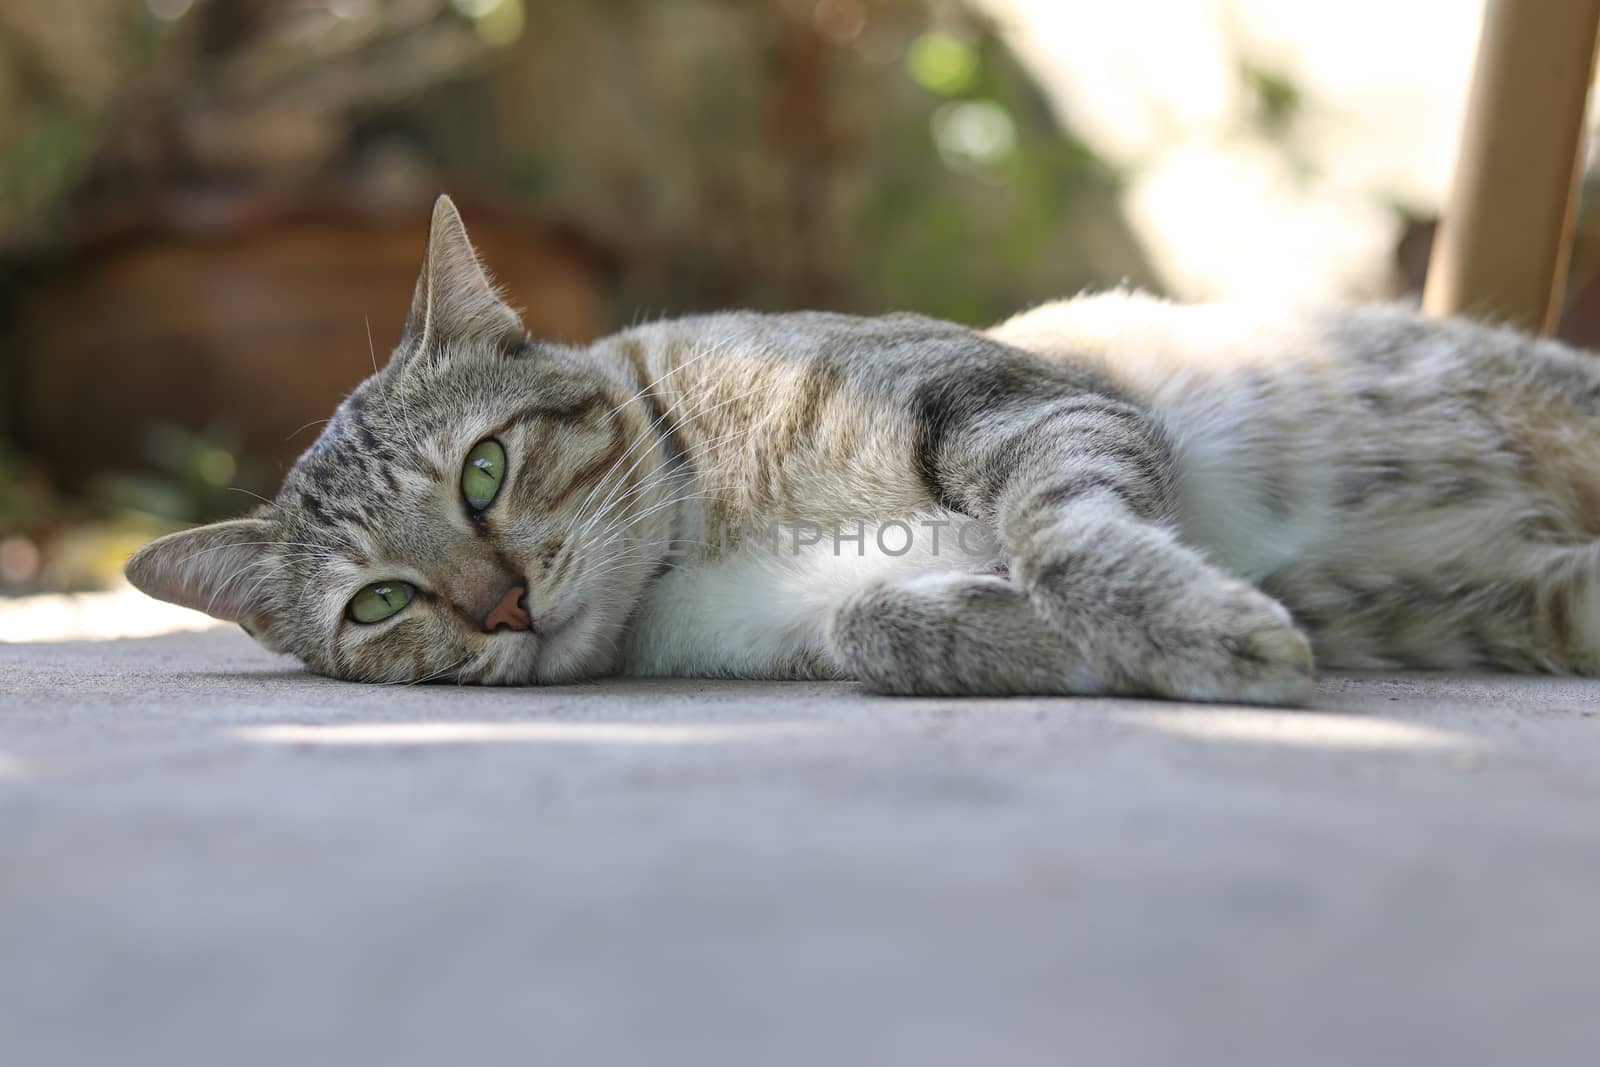 A cat lying on the floor with eyes staring ahead. by Eungsuwat